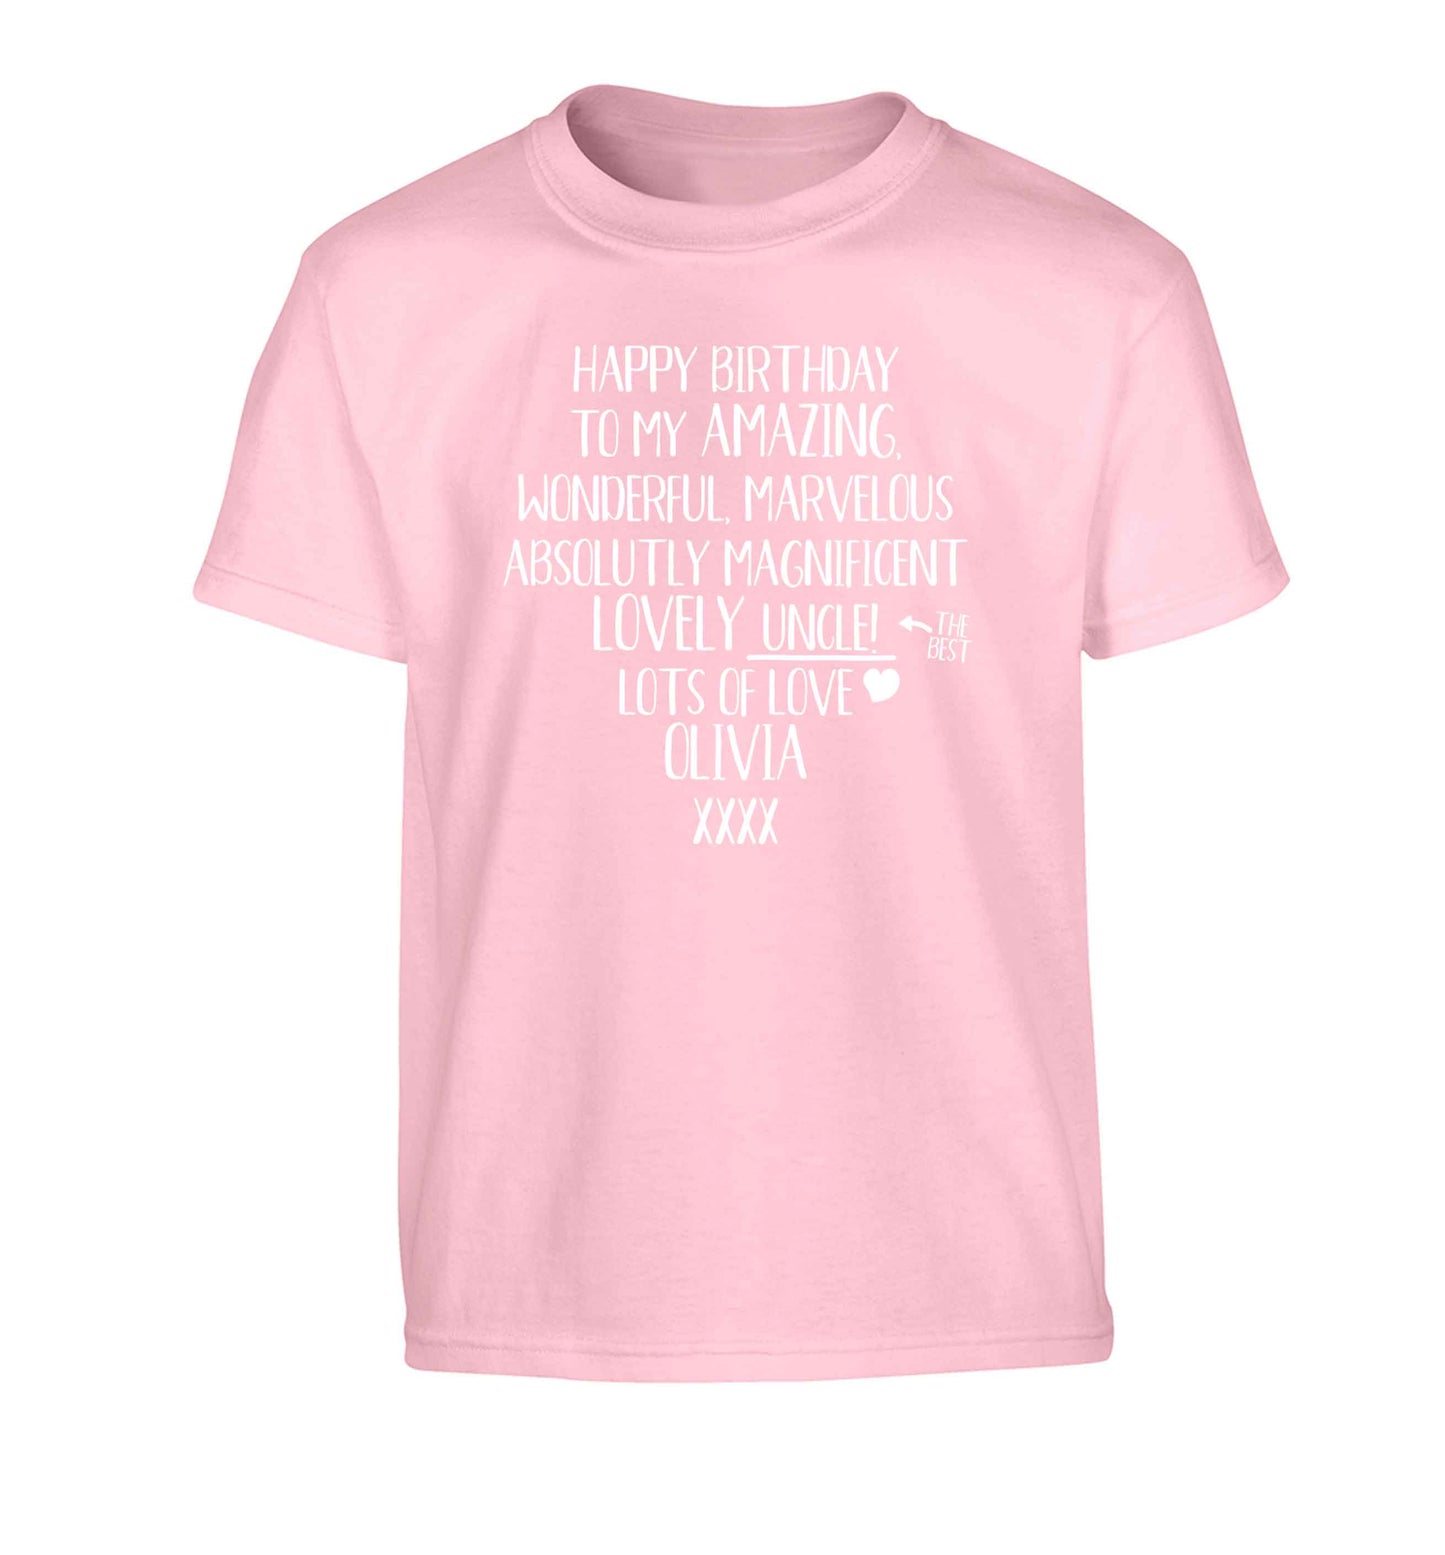 Personalised happy birthday to my amazing, wonderful, lovely uncle Children's light pink Tshirt 12-13 Years